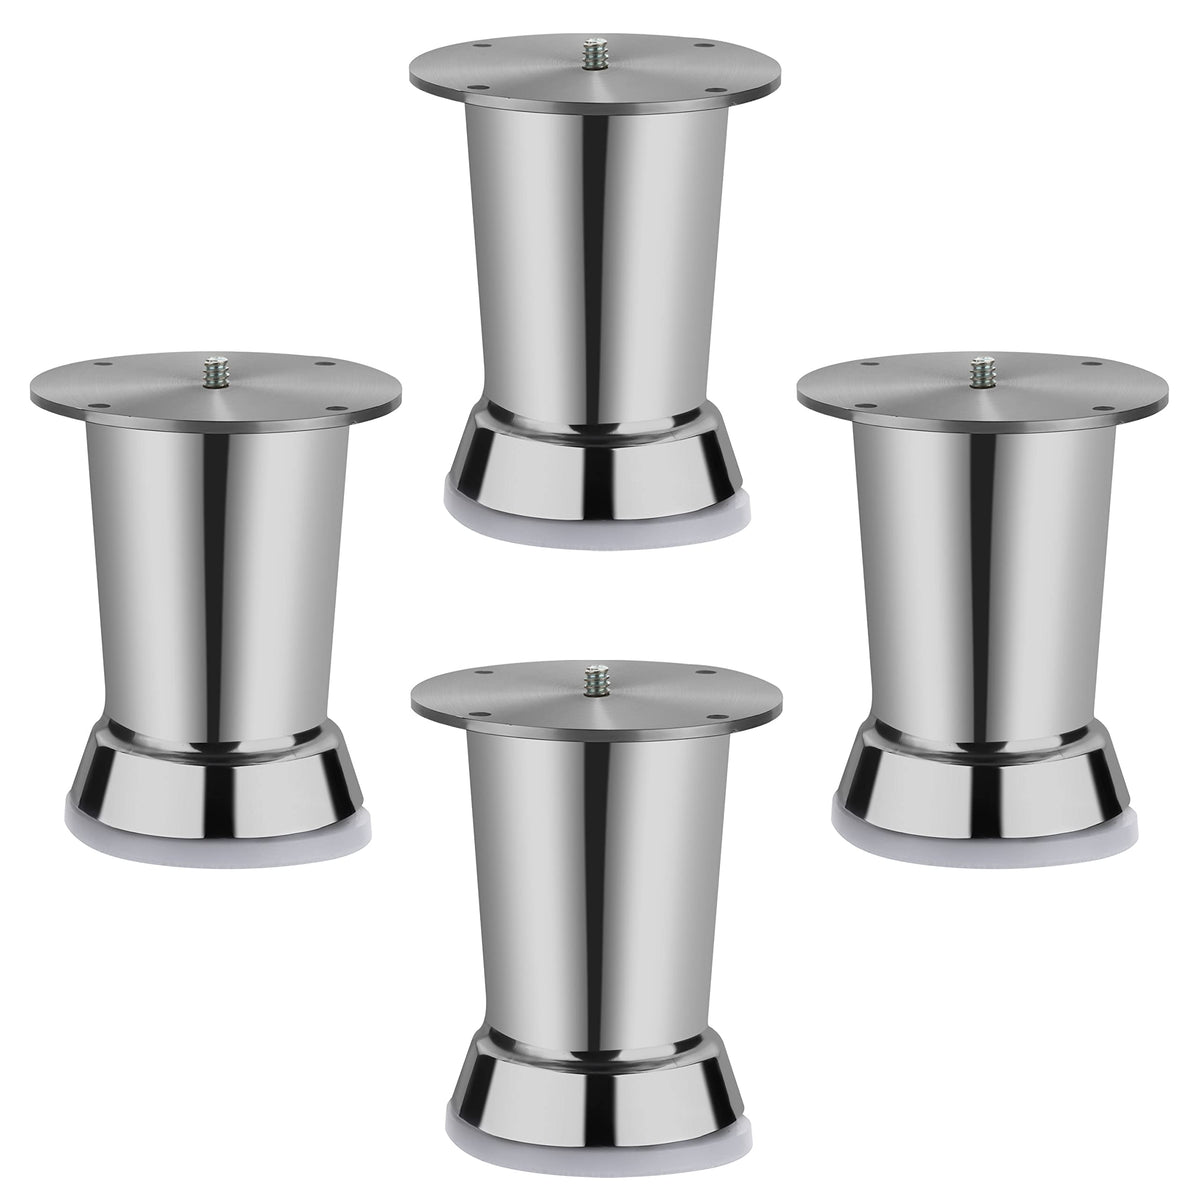 Plantex Heavy Duty Stainless Steel 4 inch Sofa Leg/Bed Furniture Leg Pair for Home Furnitures (DTS-51, Chrome) – Pcs - 4